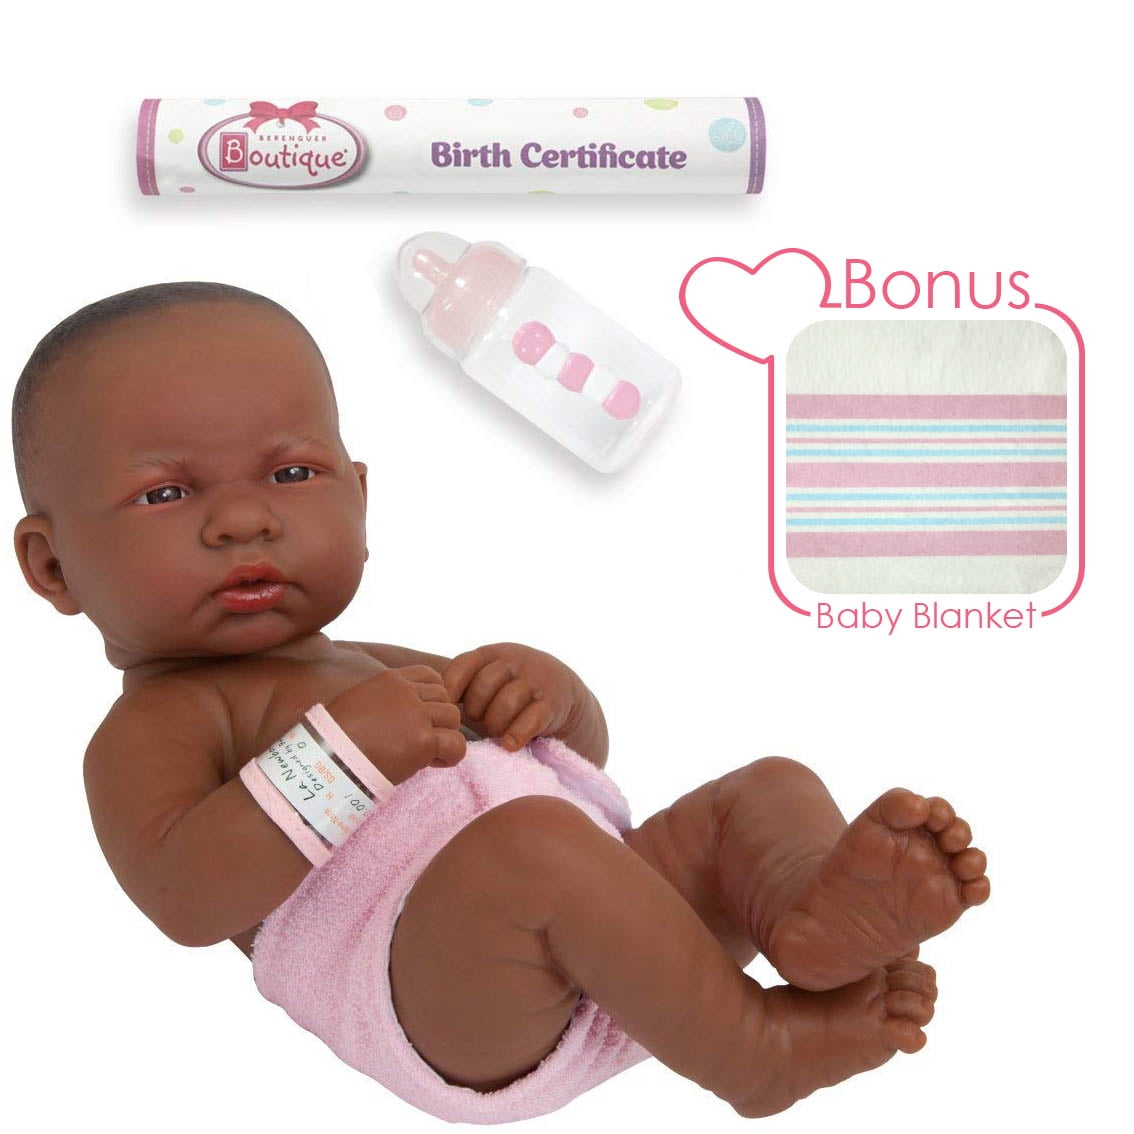 first baby doll for infant